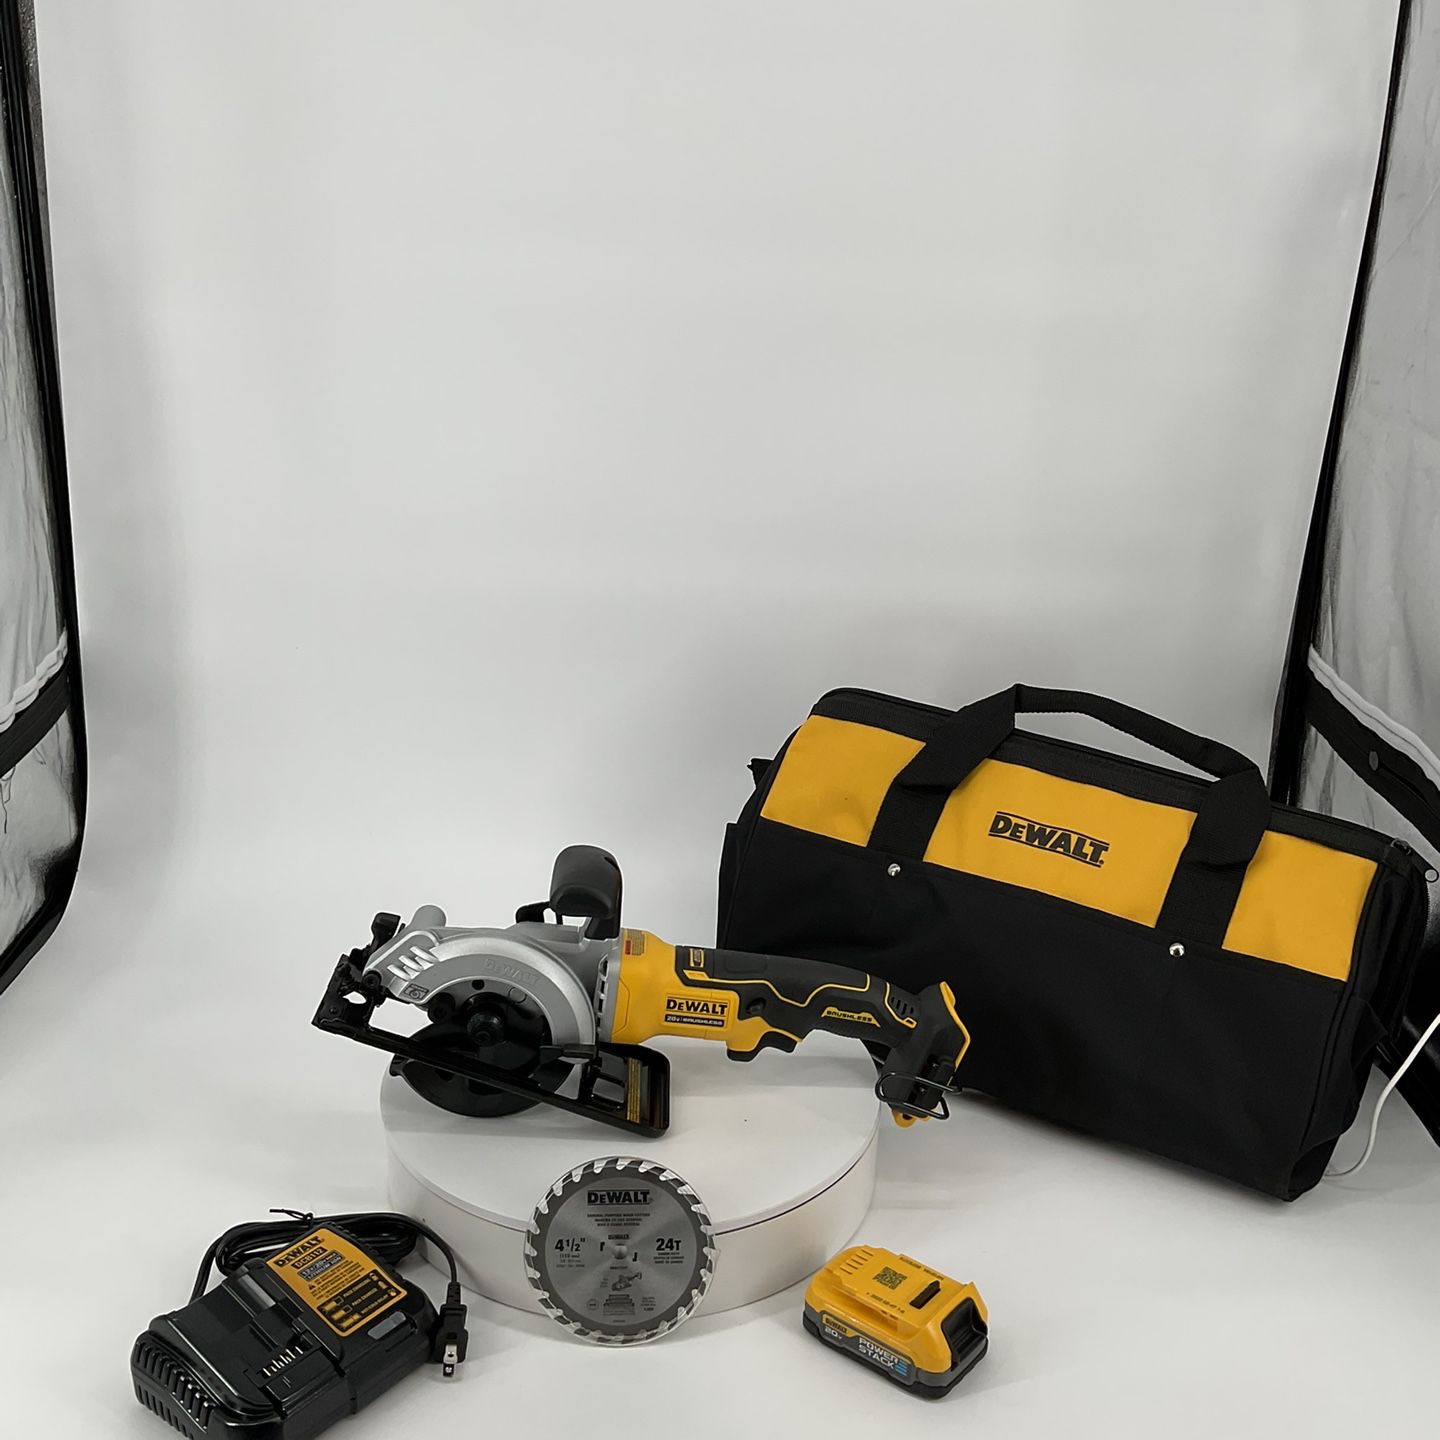 DEWALT Atomic 20-Volt Maximum Lithium-Ion Cordless Brushless 4-1/2 in. Circular Saw Kit with 1.7 Ah Battery and Charger